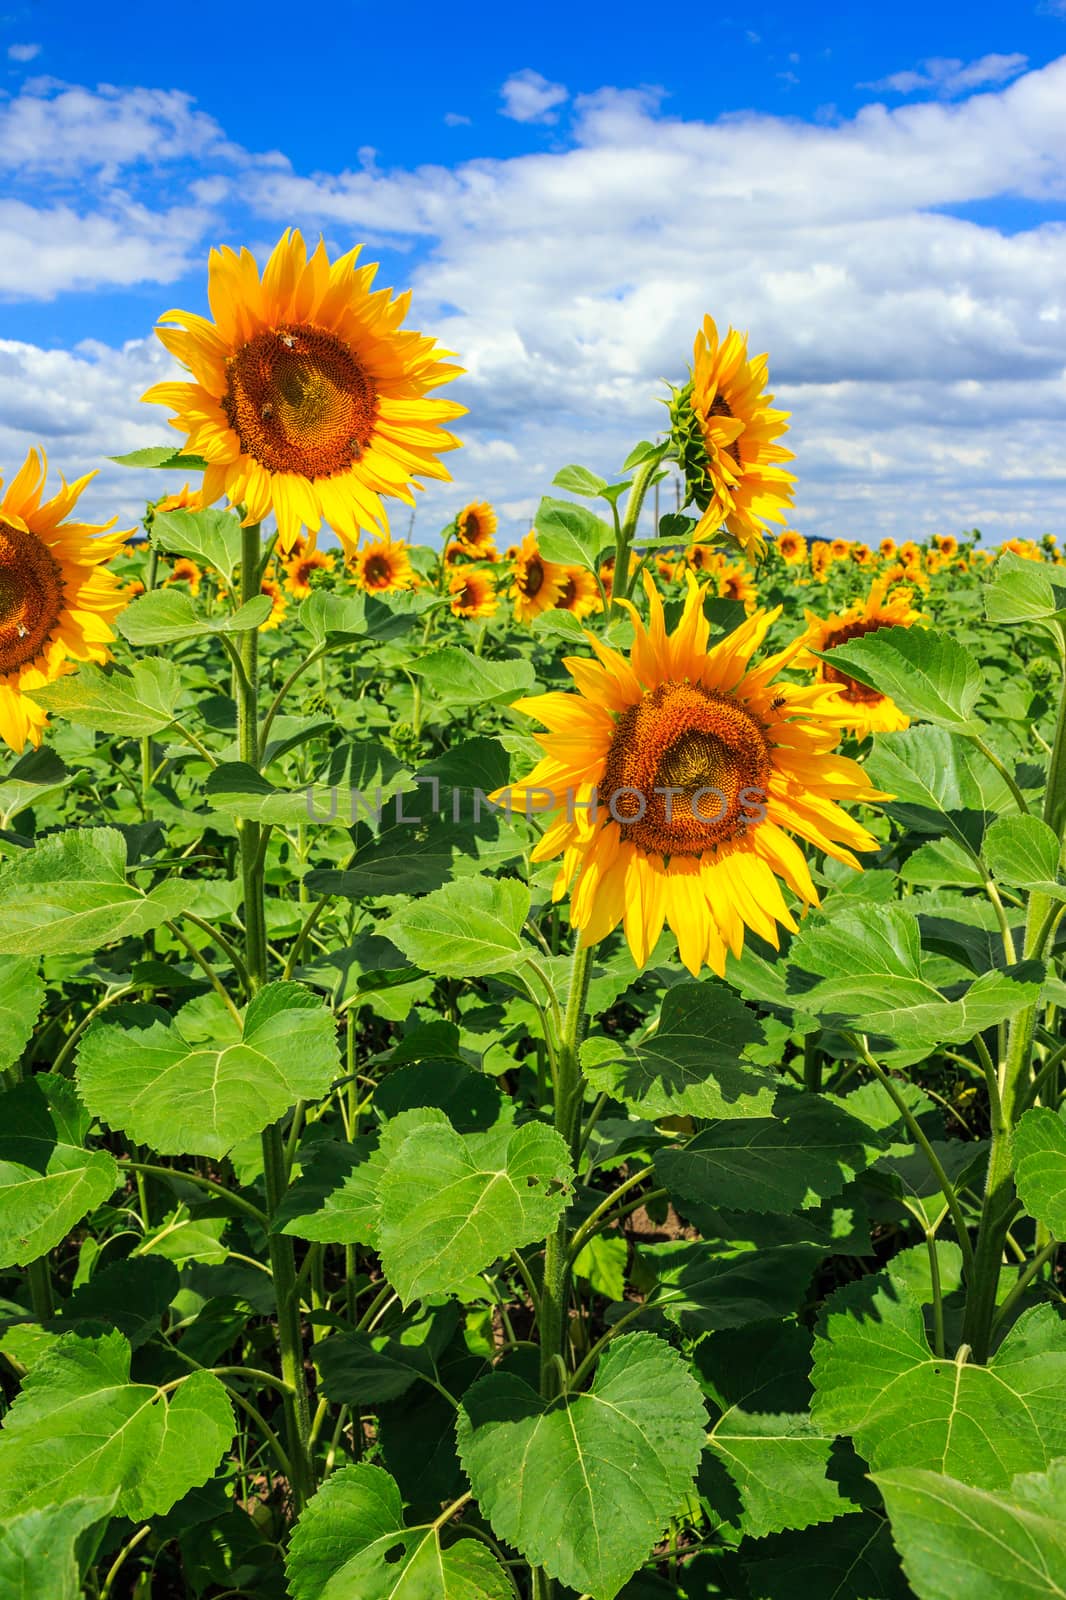 young field of sunflowers under the blue sky vertical